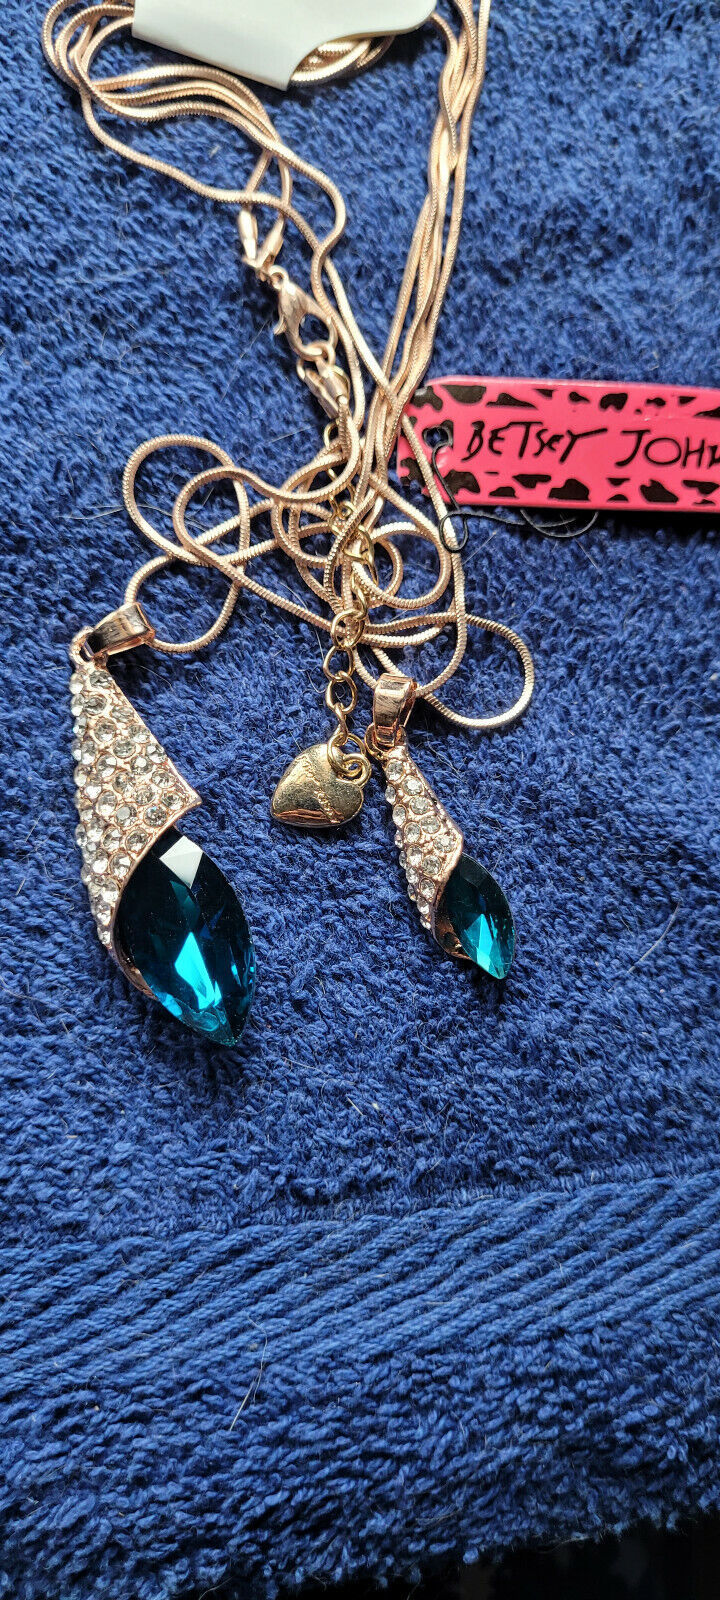 New Betsey Johnson Necklace Teal Rhinestone Double Drop Necklace Decorative Nice - $24.99